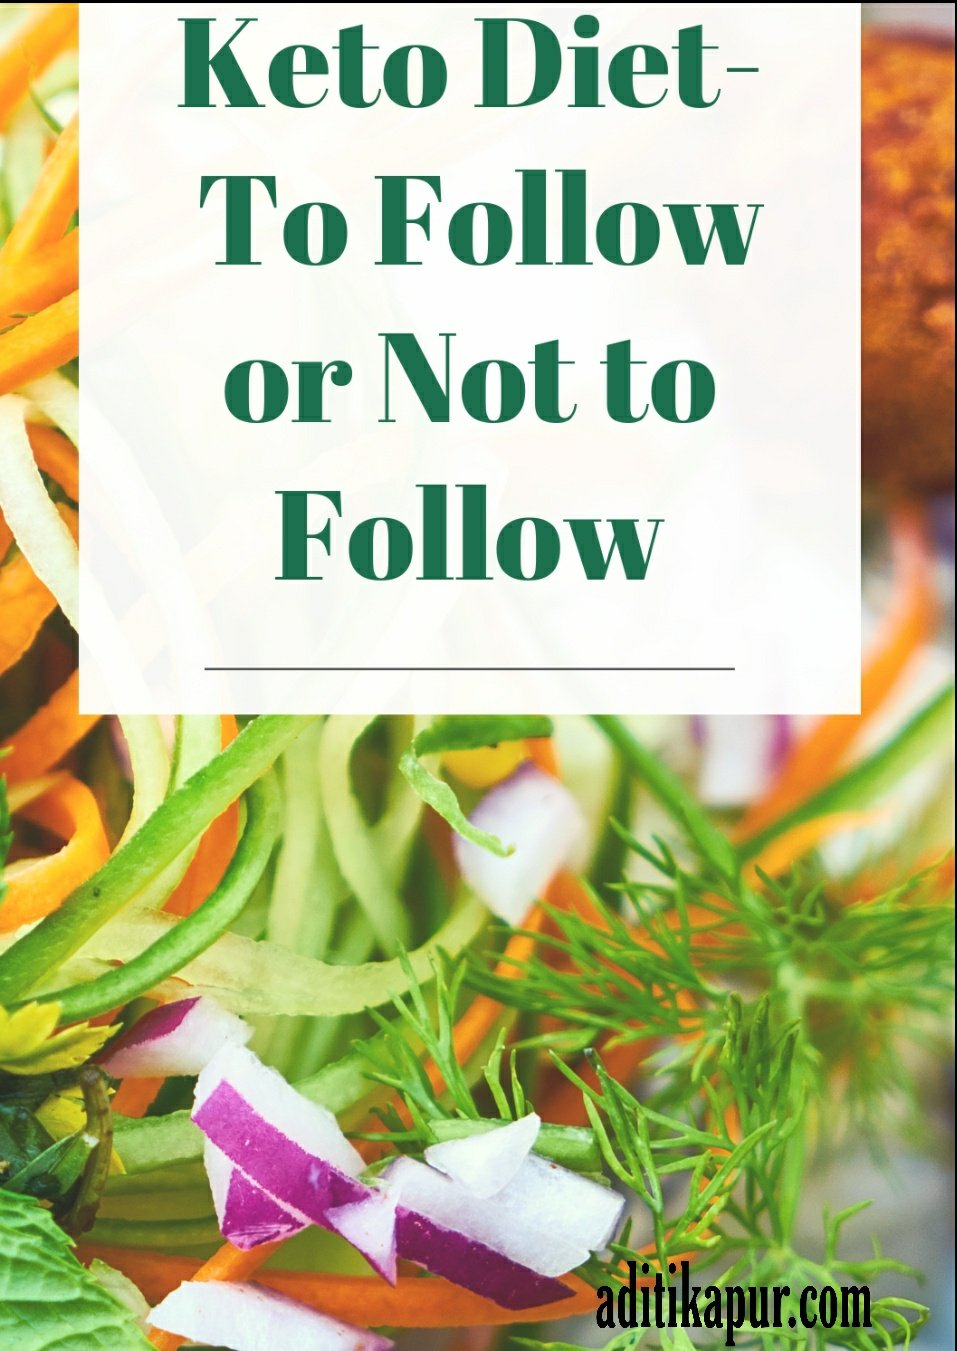 Keto diet : To Follow or Not to Follow